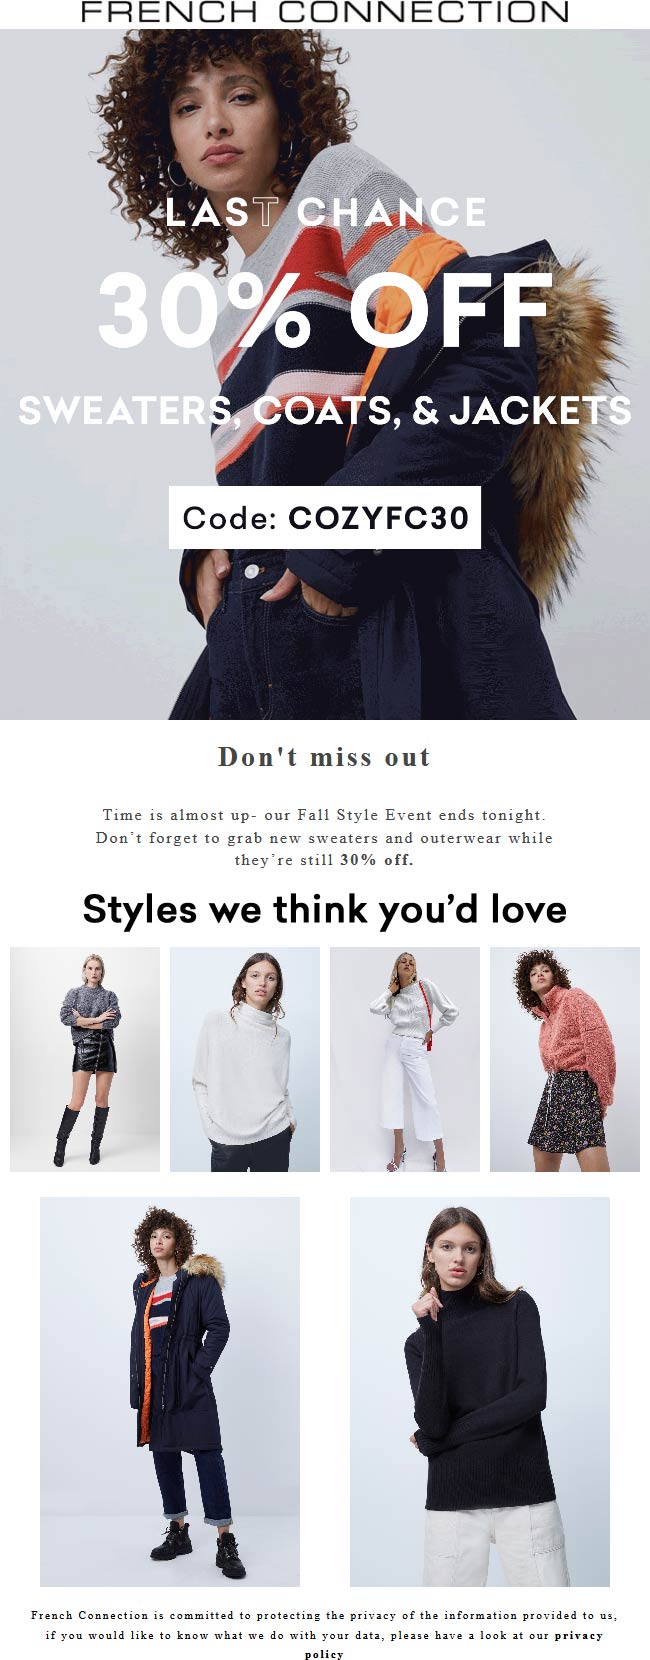 French Connection stores Coupon  30% off outerwear today at French Connection via promo code COZYFC30 #frenchconnection 